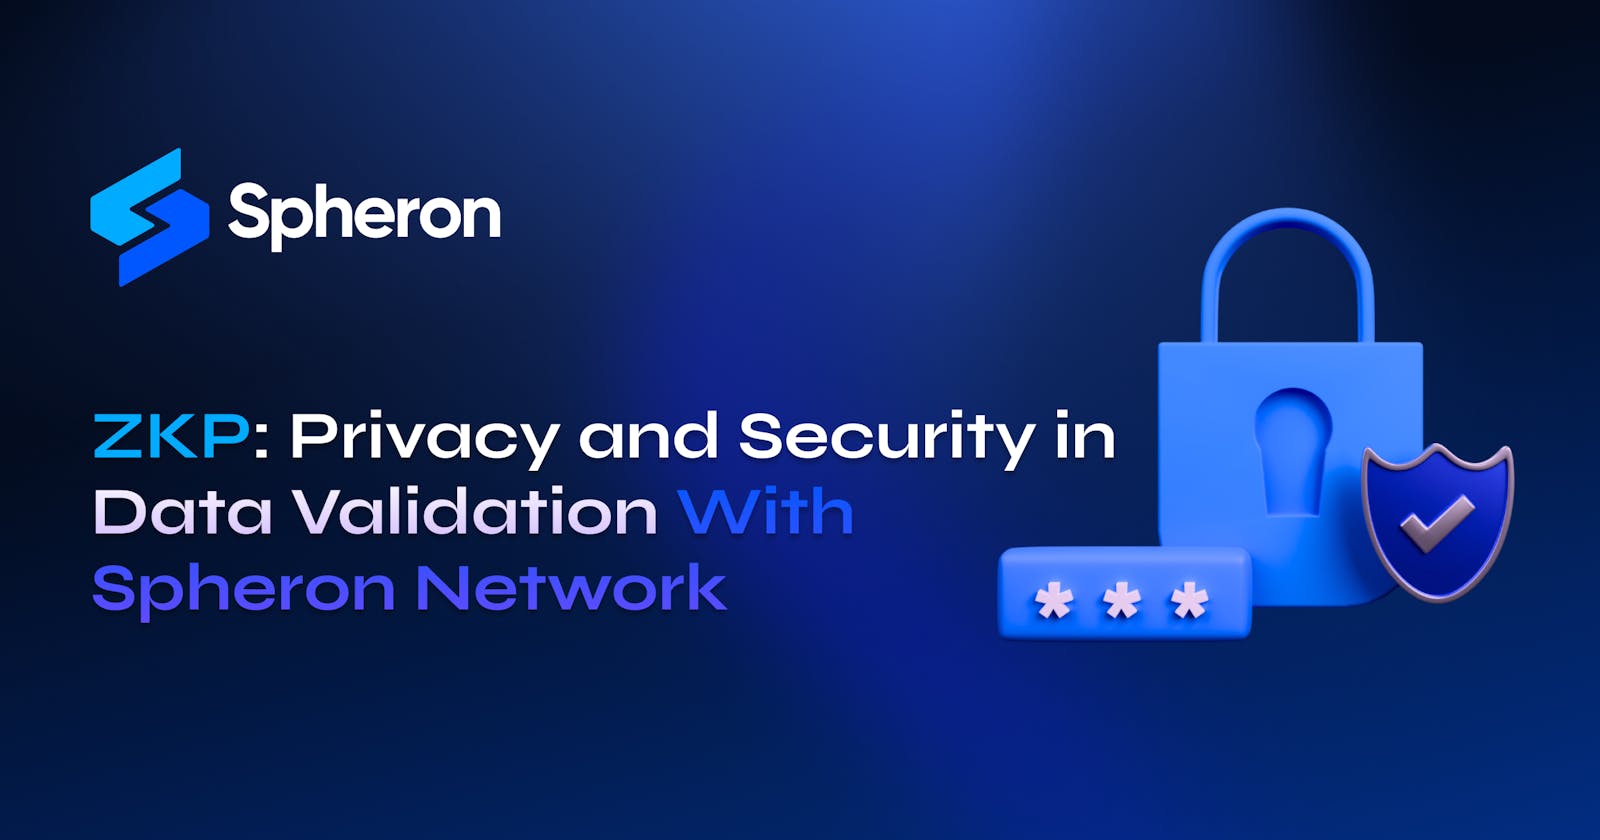 ZKP: Privacy and Security in Data Validation With Spheron Network